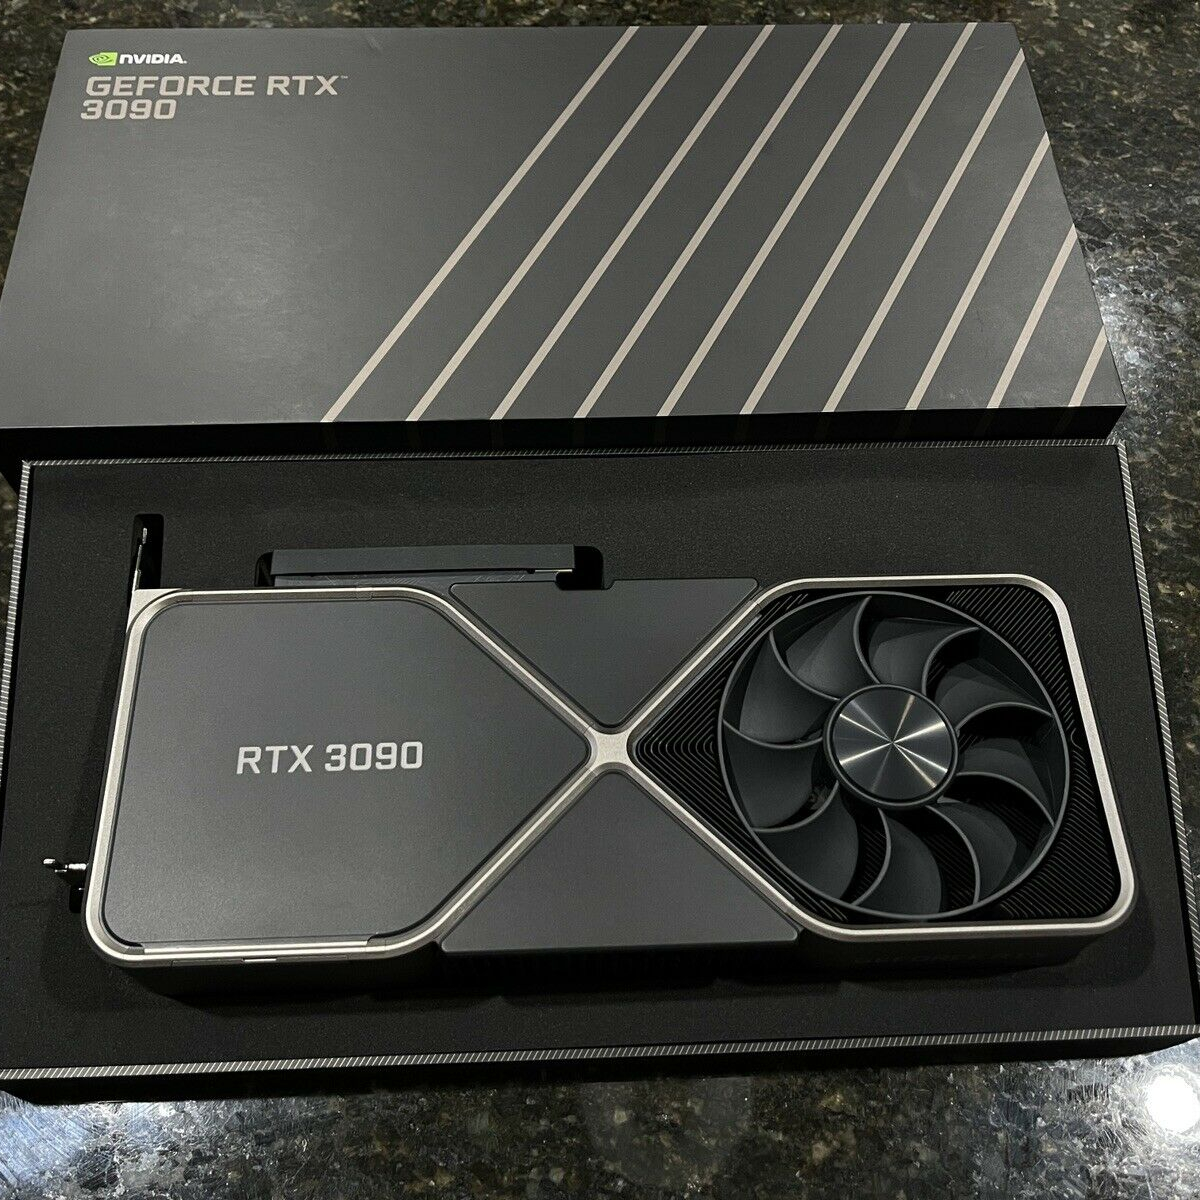 Nvidia Geforce RTX 3090 Graphics cards